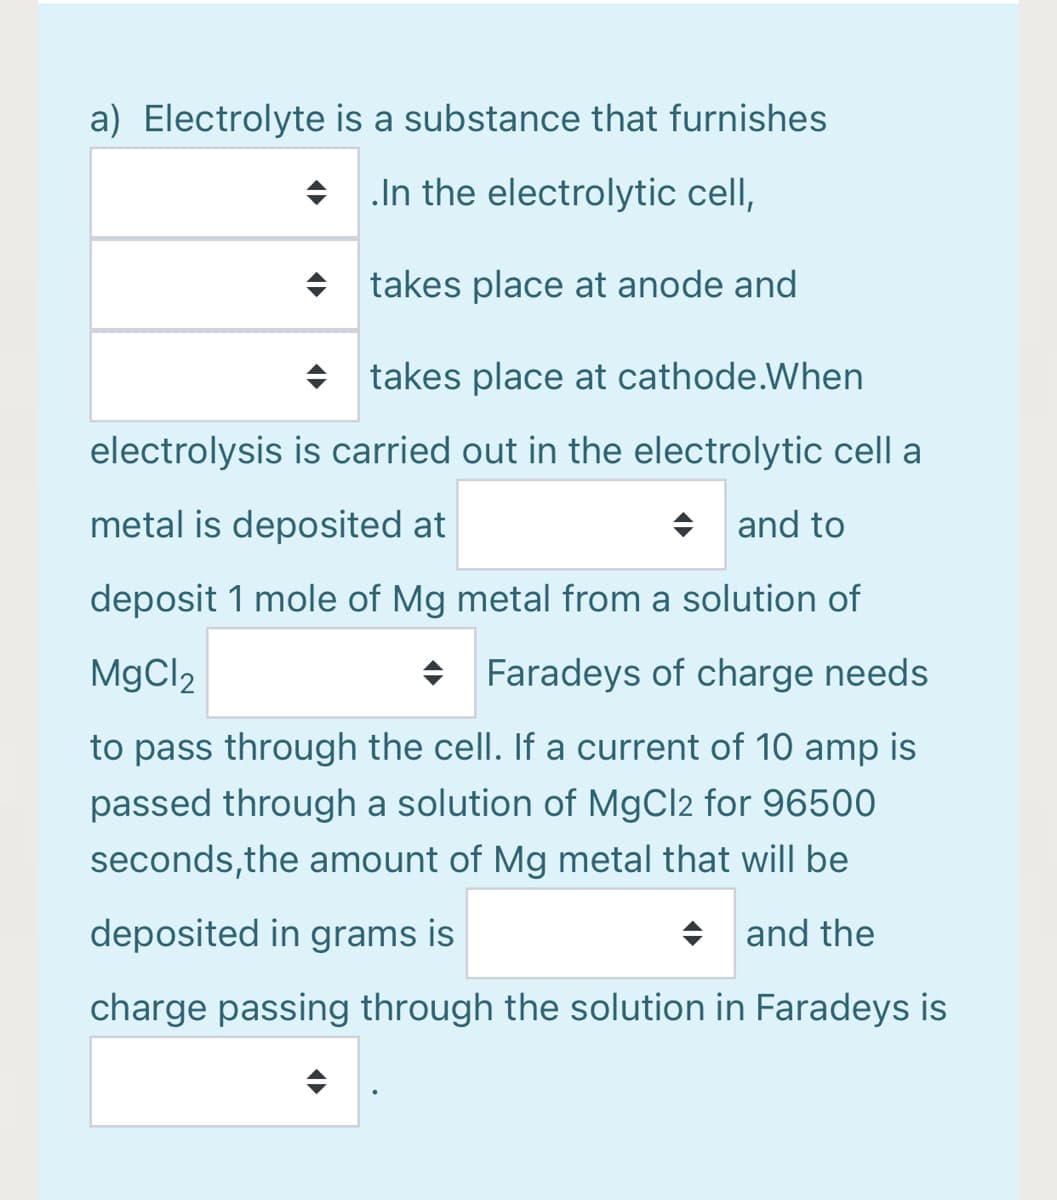 a) Electrolyte is a substance that furnishes
+ In the electrolytic cell,
+ takes place at anode and
+ takes place at cathode.When
electrolysis is carried out in the electrolytic cell a
metal is deposited at
+ and to
deposit 1 mole of Mg metal from a solution of
MgCl2
Faradeys of charge needs
to pass through the cell. If a current of 10 amp is
passed through a solution of MgCl2 for 96500
seconds,the amount of Mg metal that will be
deposited in grams is
+ and the
charge passing through the solution in Faradeys is
